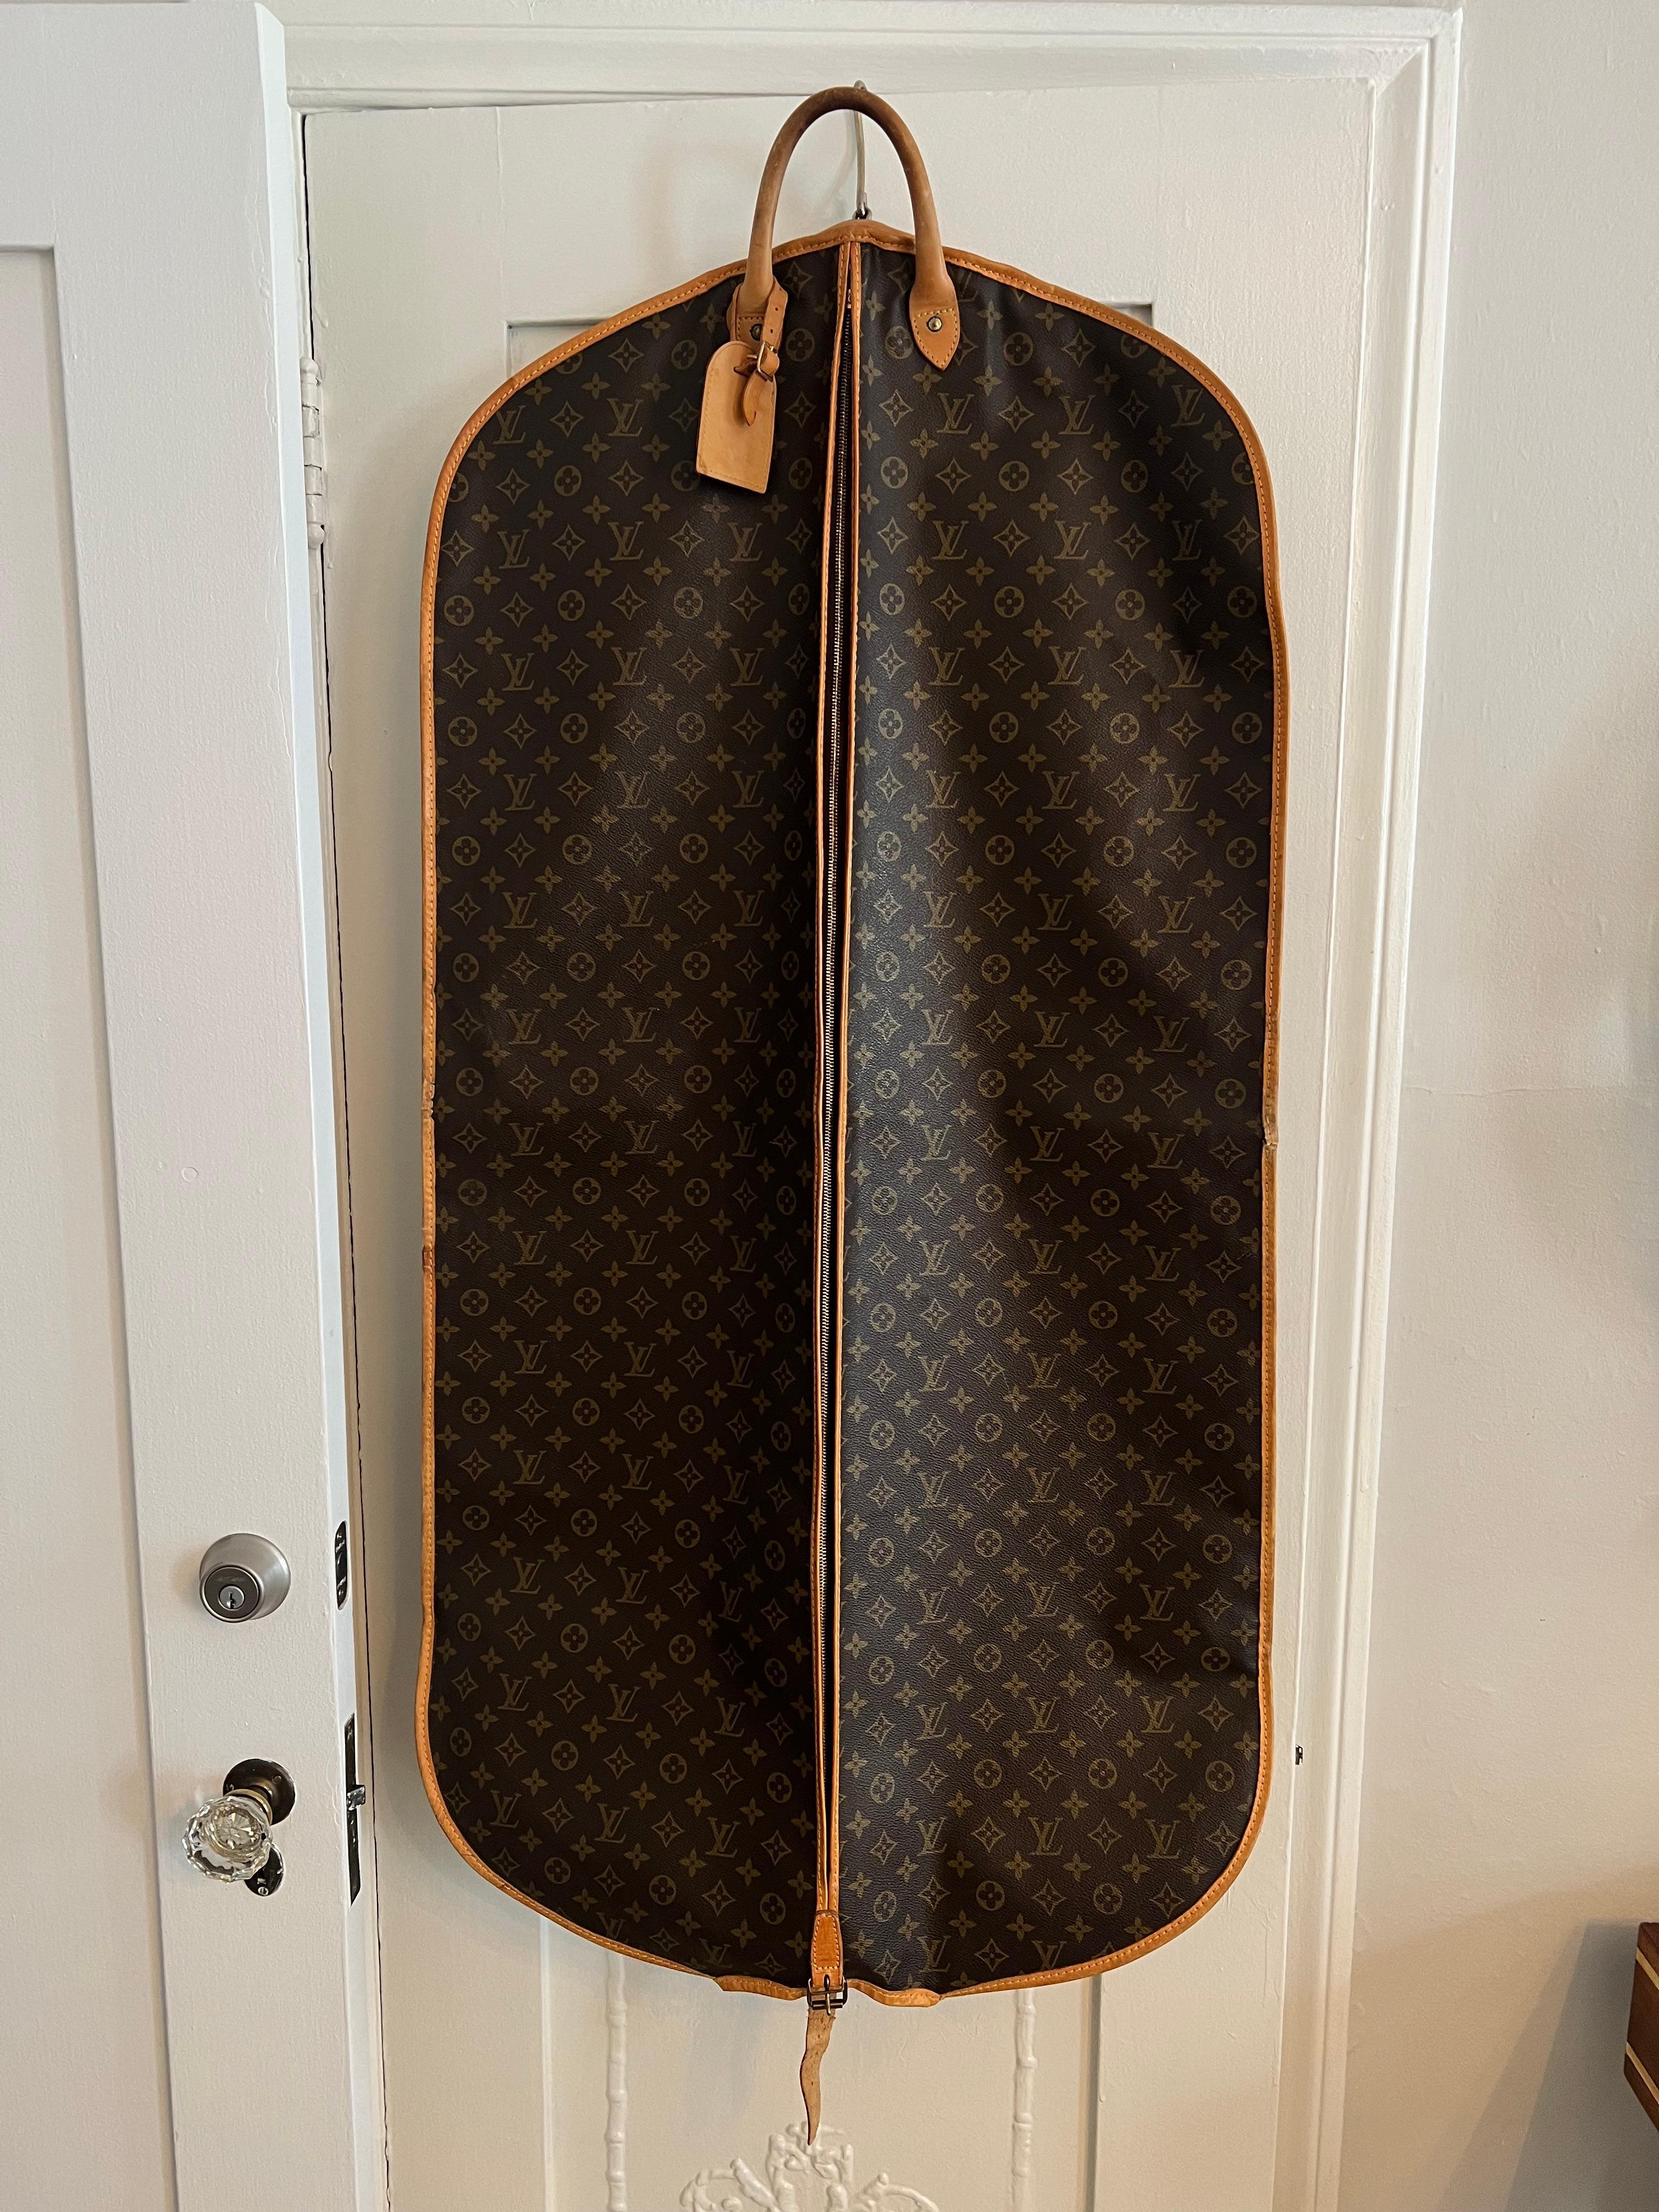 A wonderful Louis Vuitton Garment Bag - holds several shirts and suits with a convenient handle for carrying after folded.  The bag also has a hook for hanging over any door for easy access.

A leather and marked 